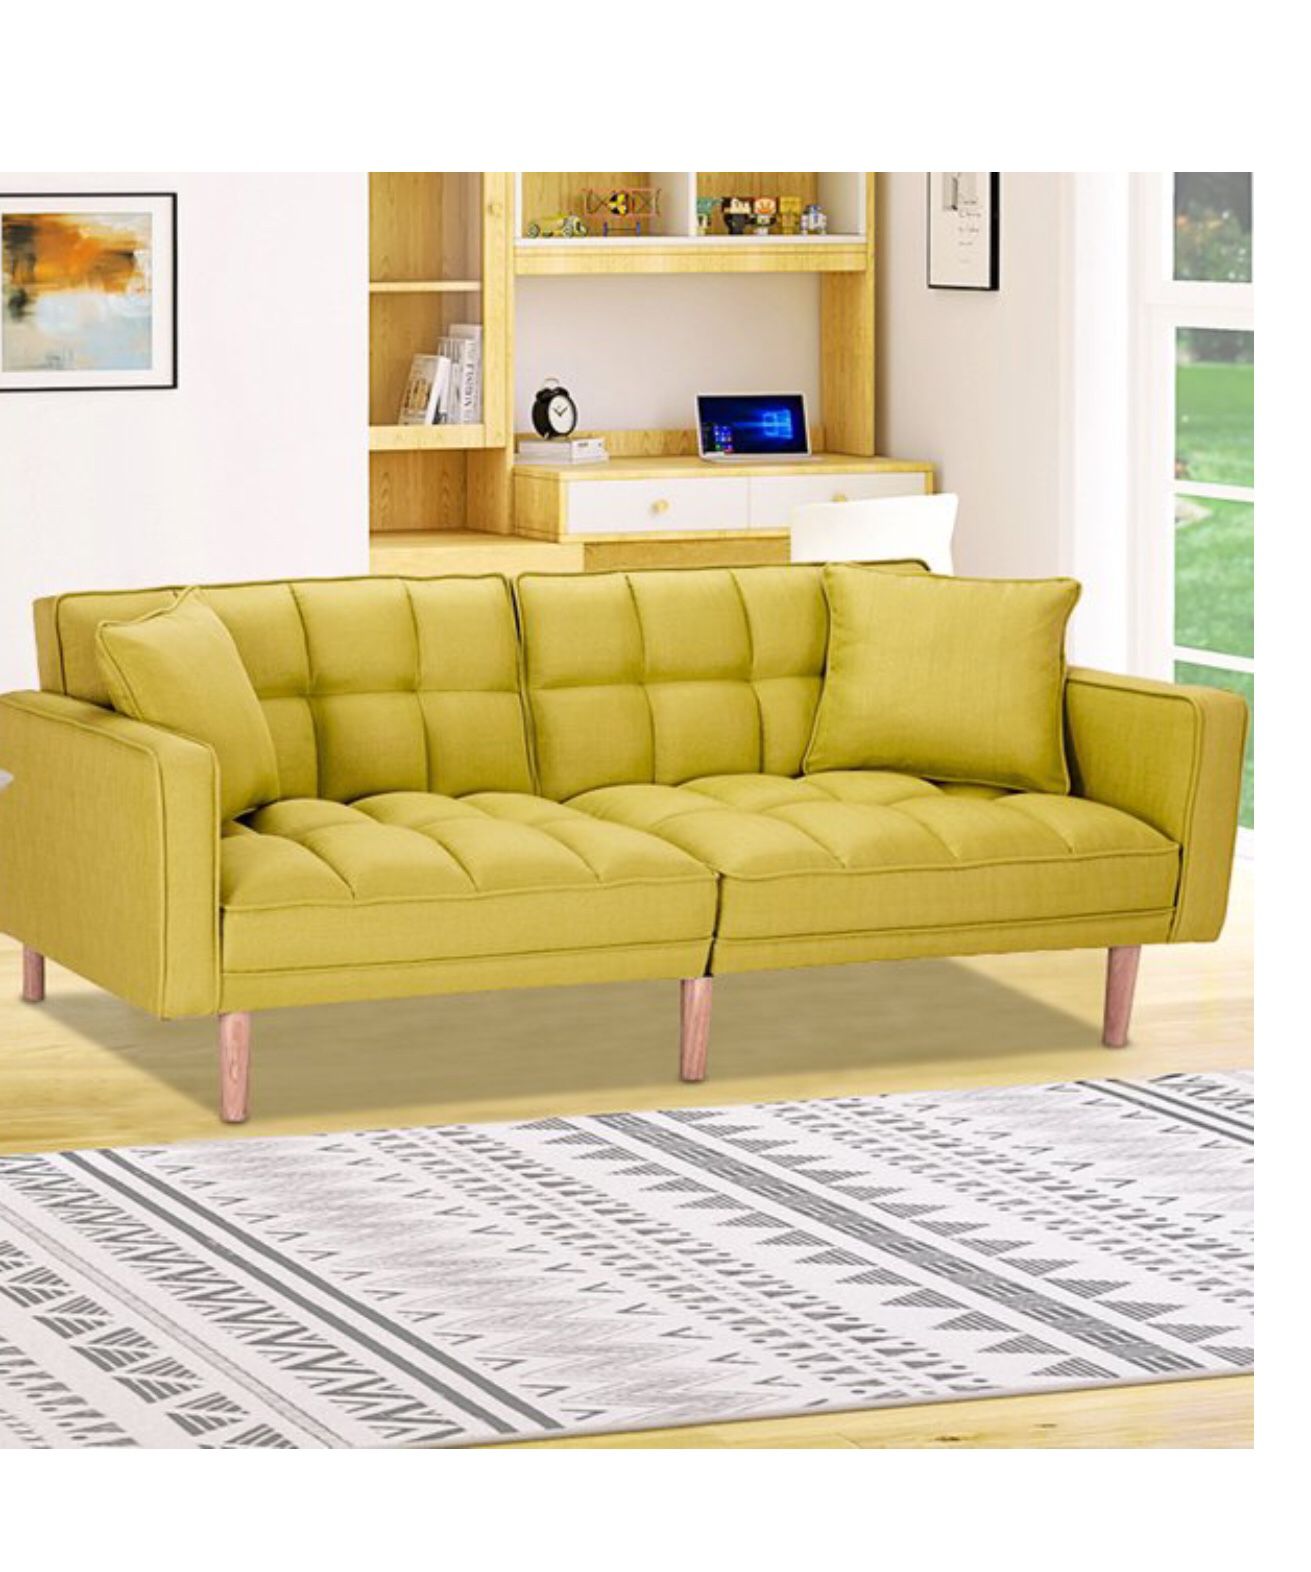 Sofa, Couch, Sofa Bed, Futon, Yellow W Pillows, Faux Leather